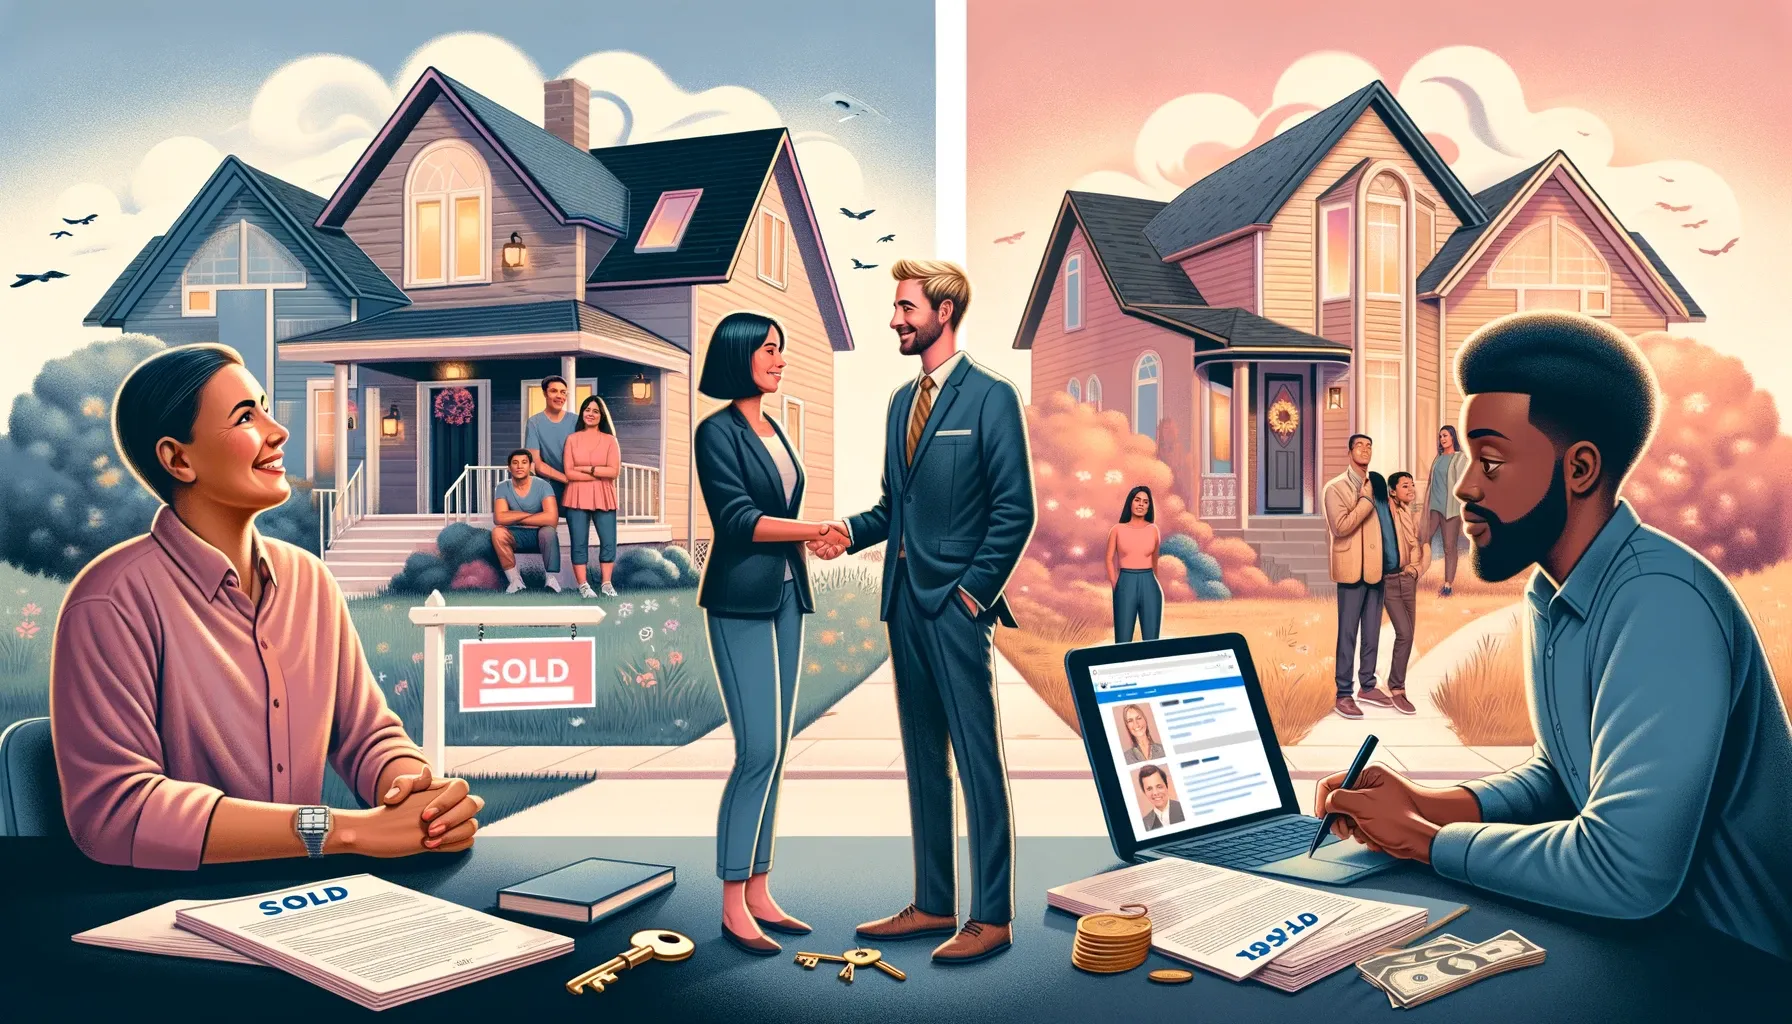 The Ultimate Guide to Finding the Right Realtor for Your Home Purchase